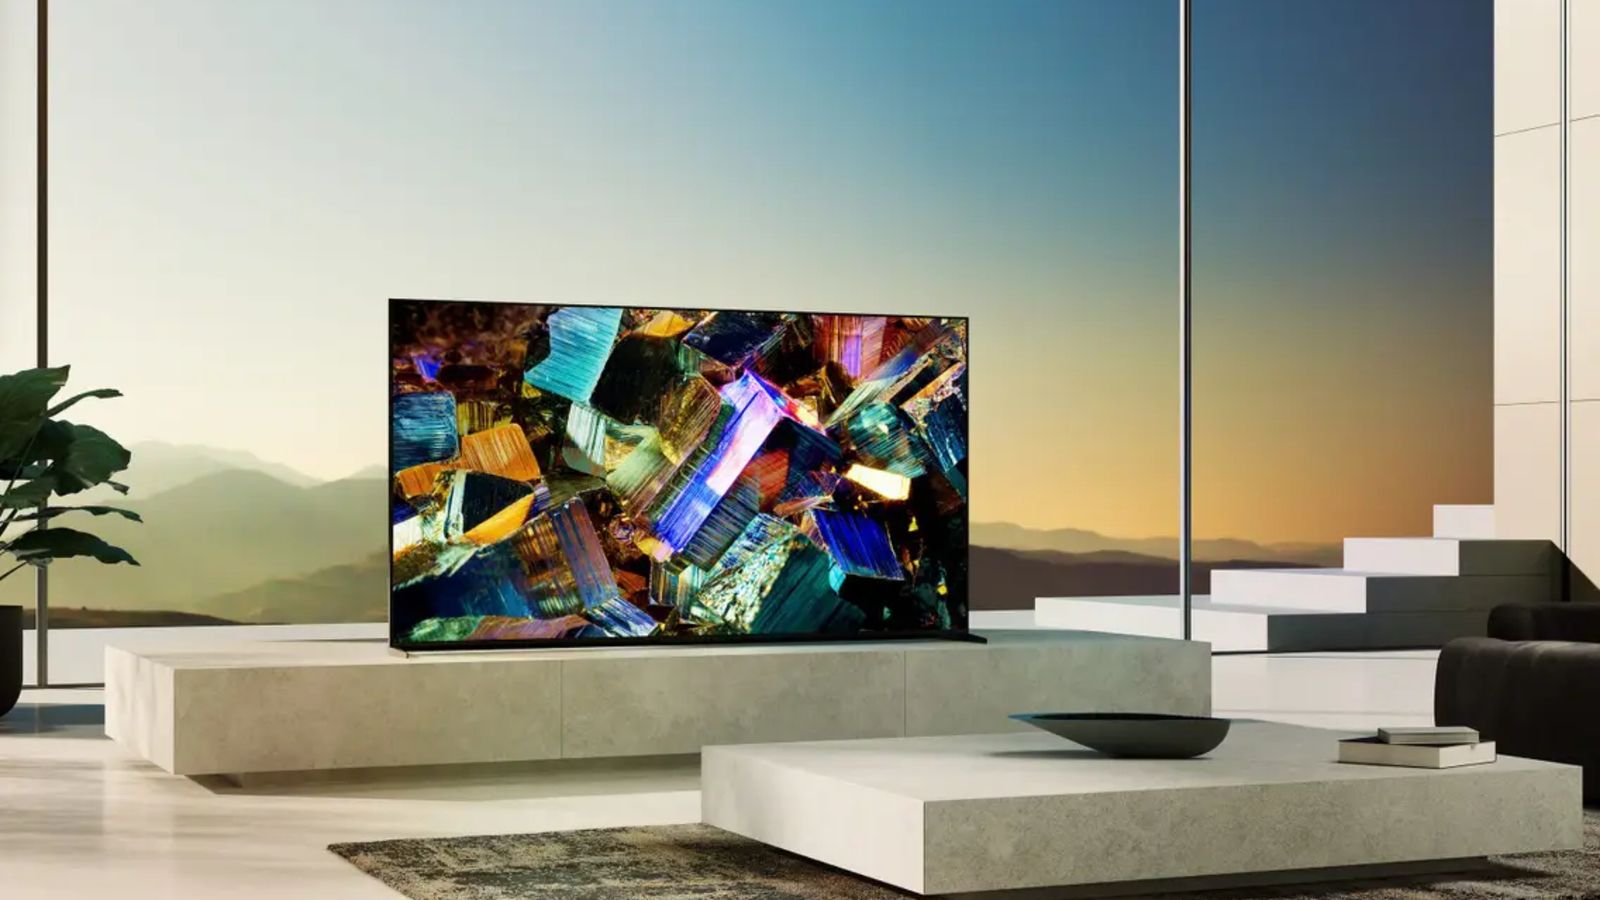 Image of a TV in a living room in front of a large floor-to-ceiling window featuring crystalised rocks on the display.